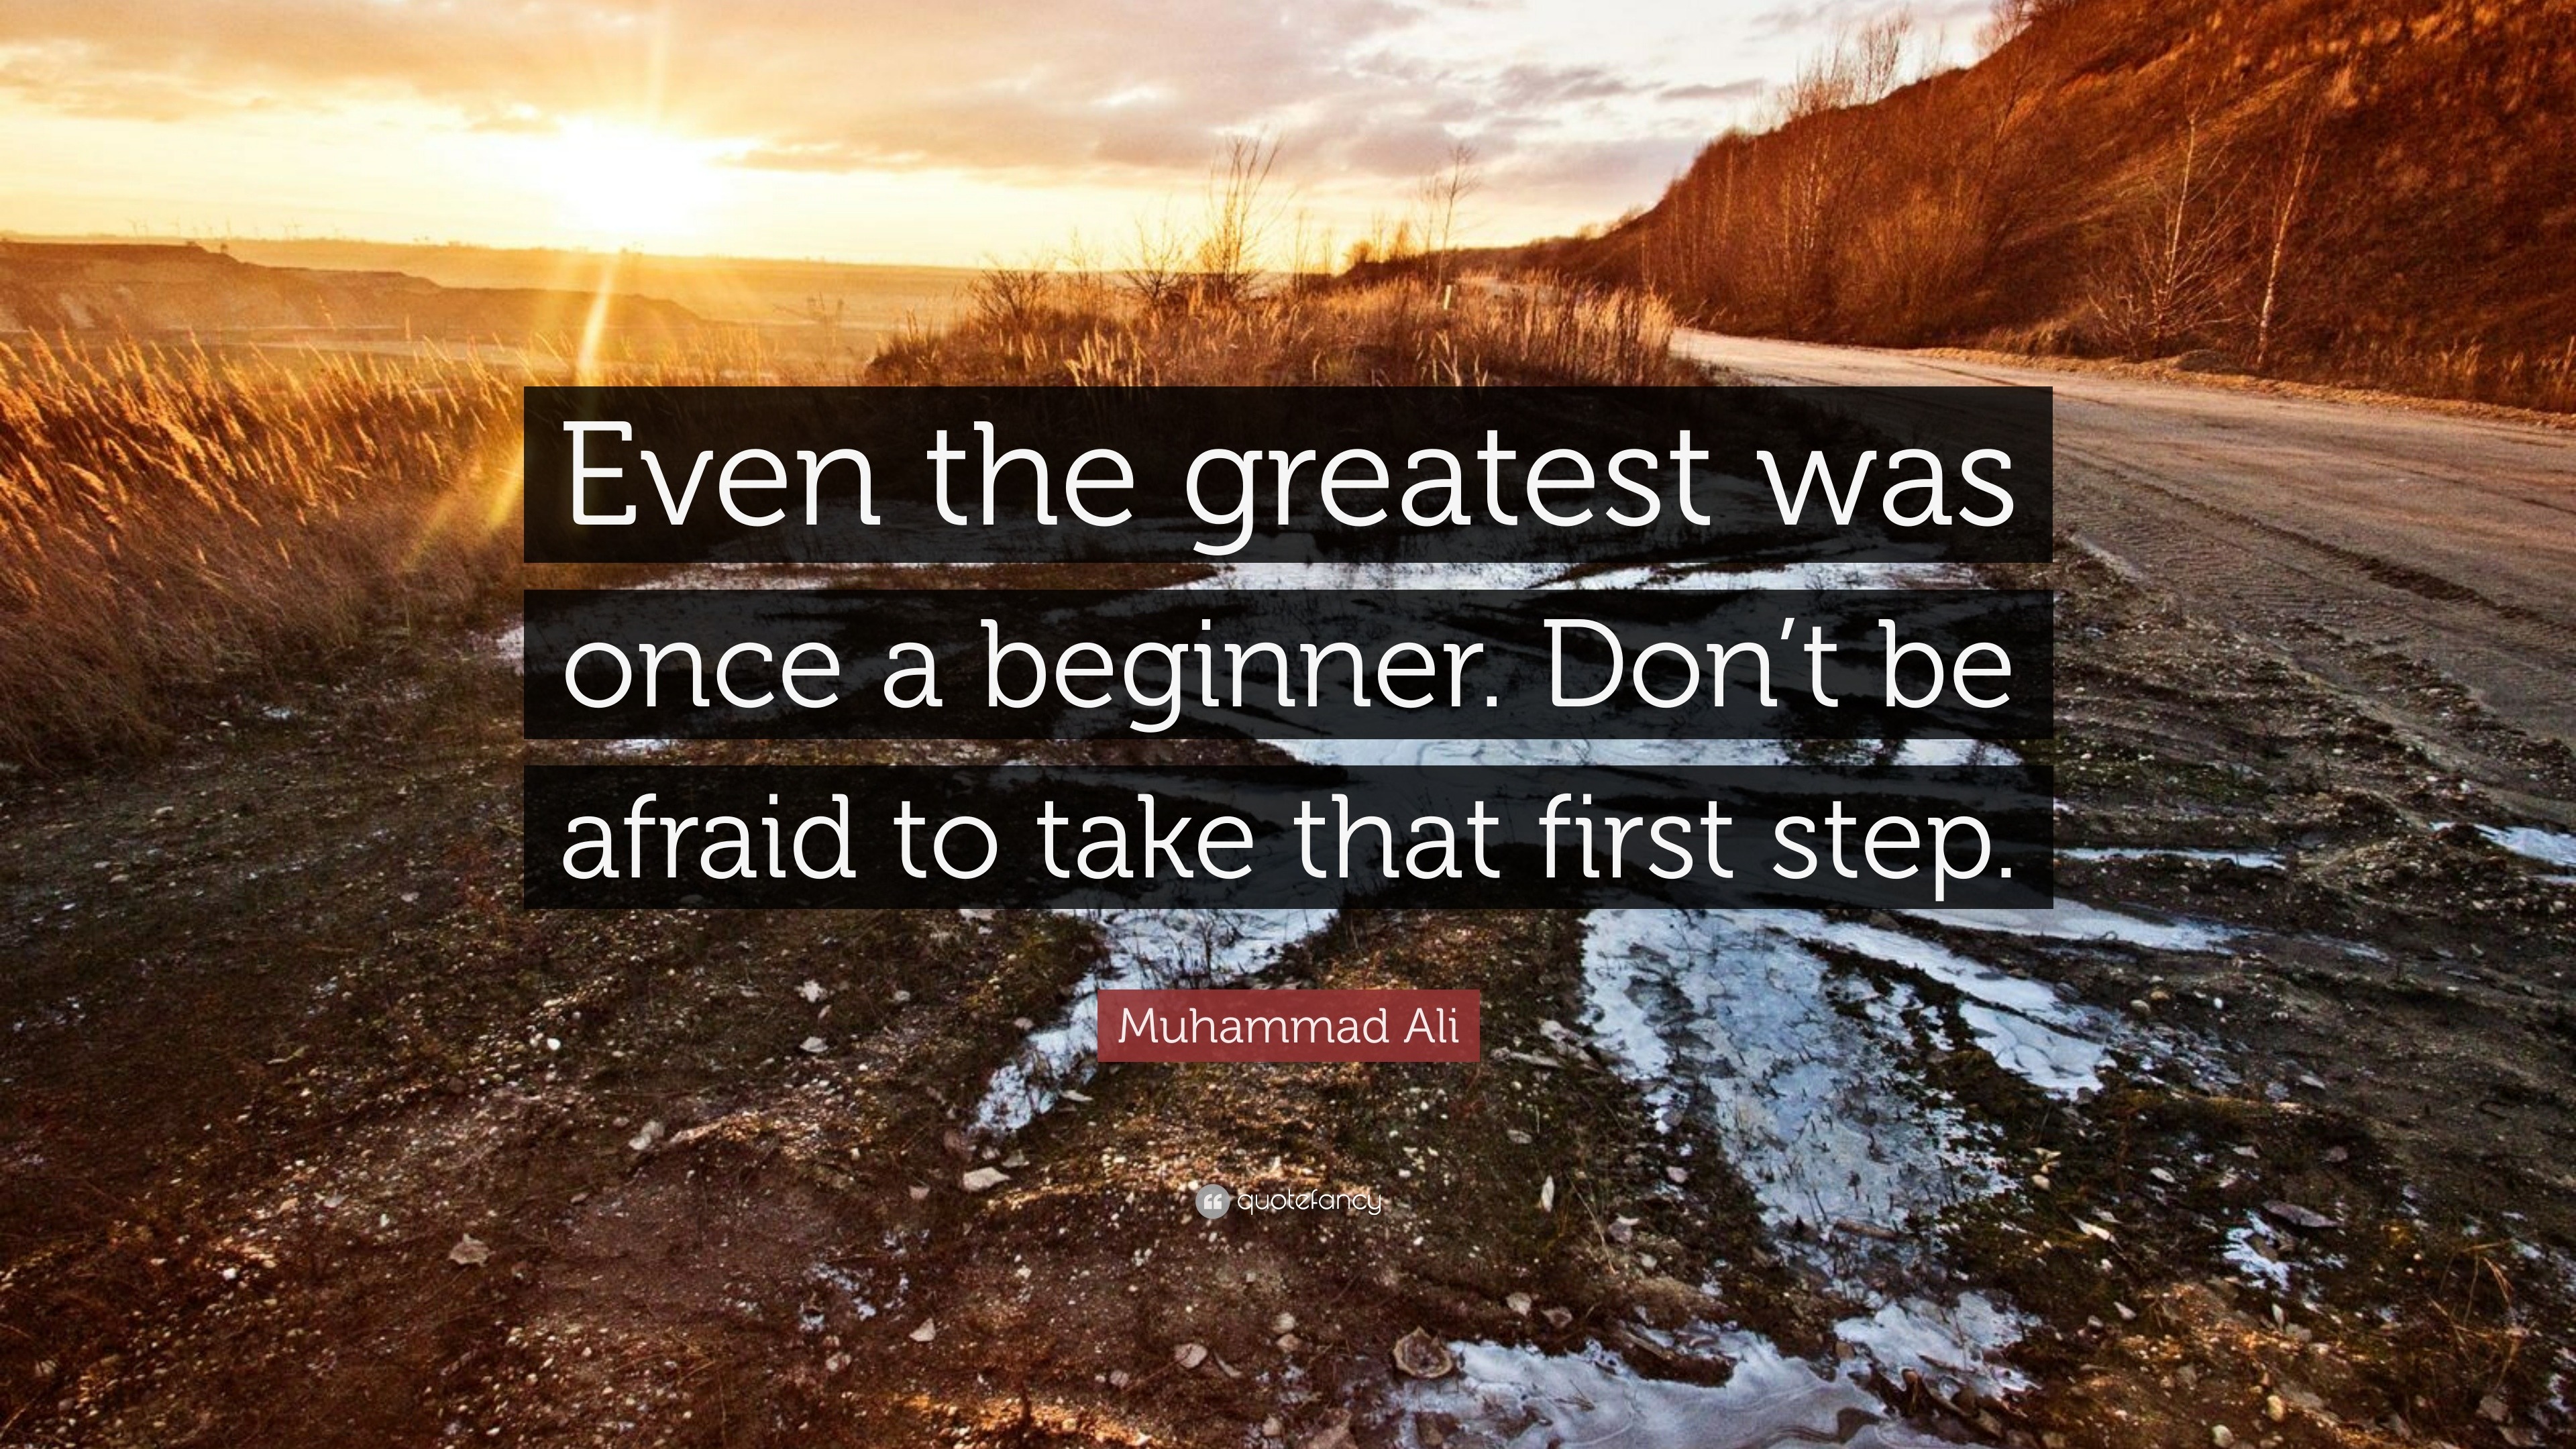 Muhammad Ali Quote: “Even the greatest was once a beginner. Don’t be